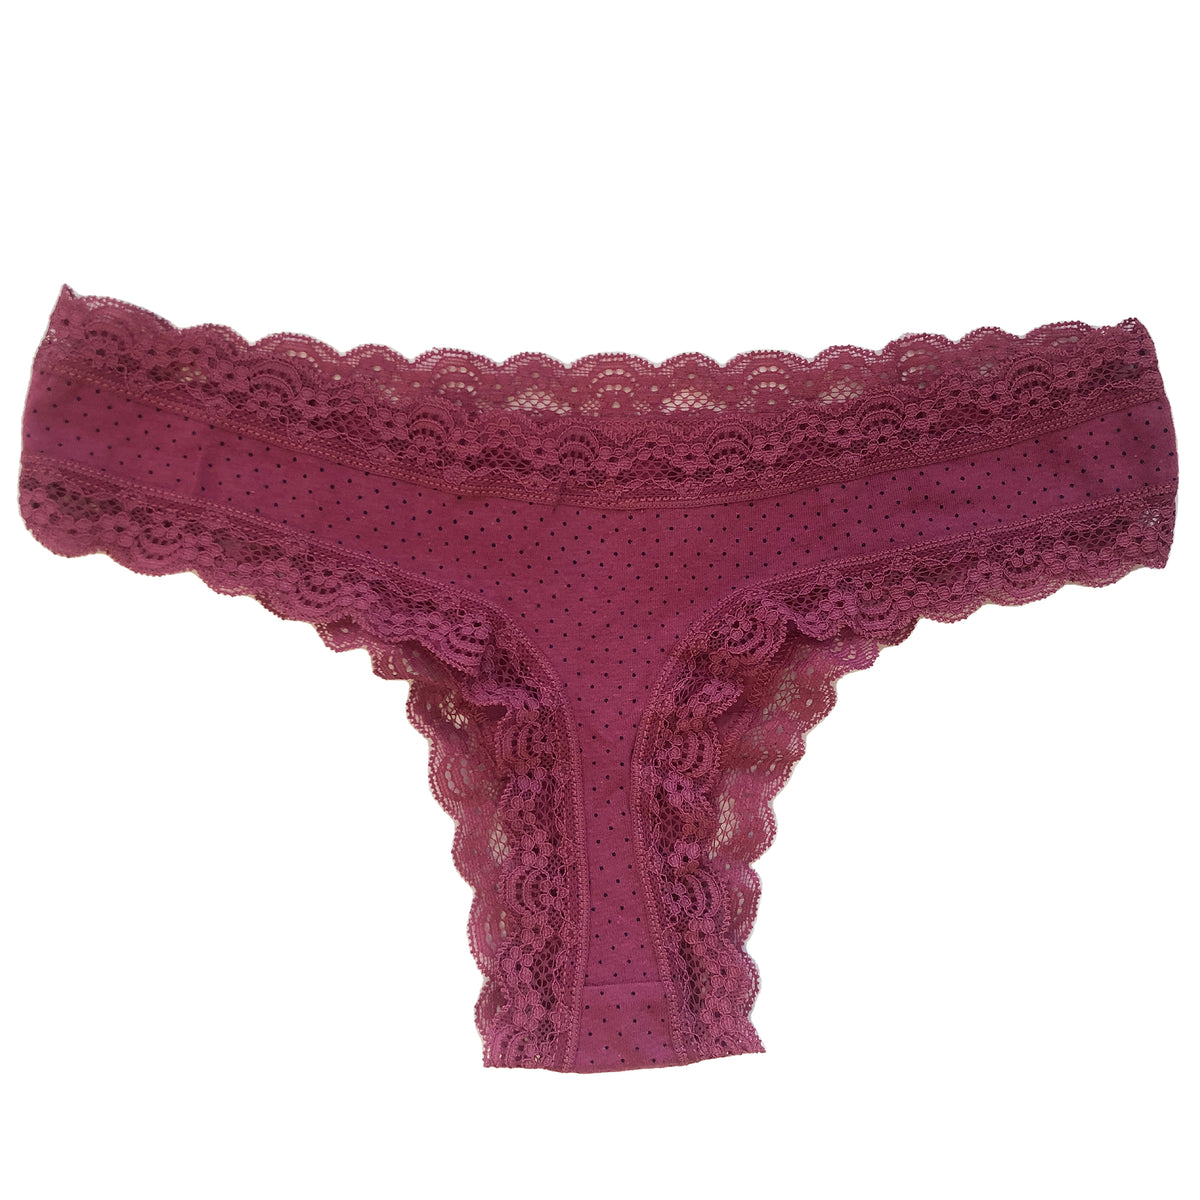 Assorted Brazilian Knickers Cotton Rich 5 Pack